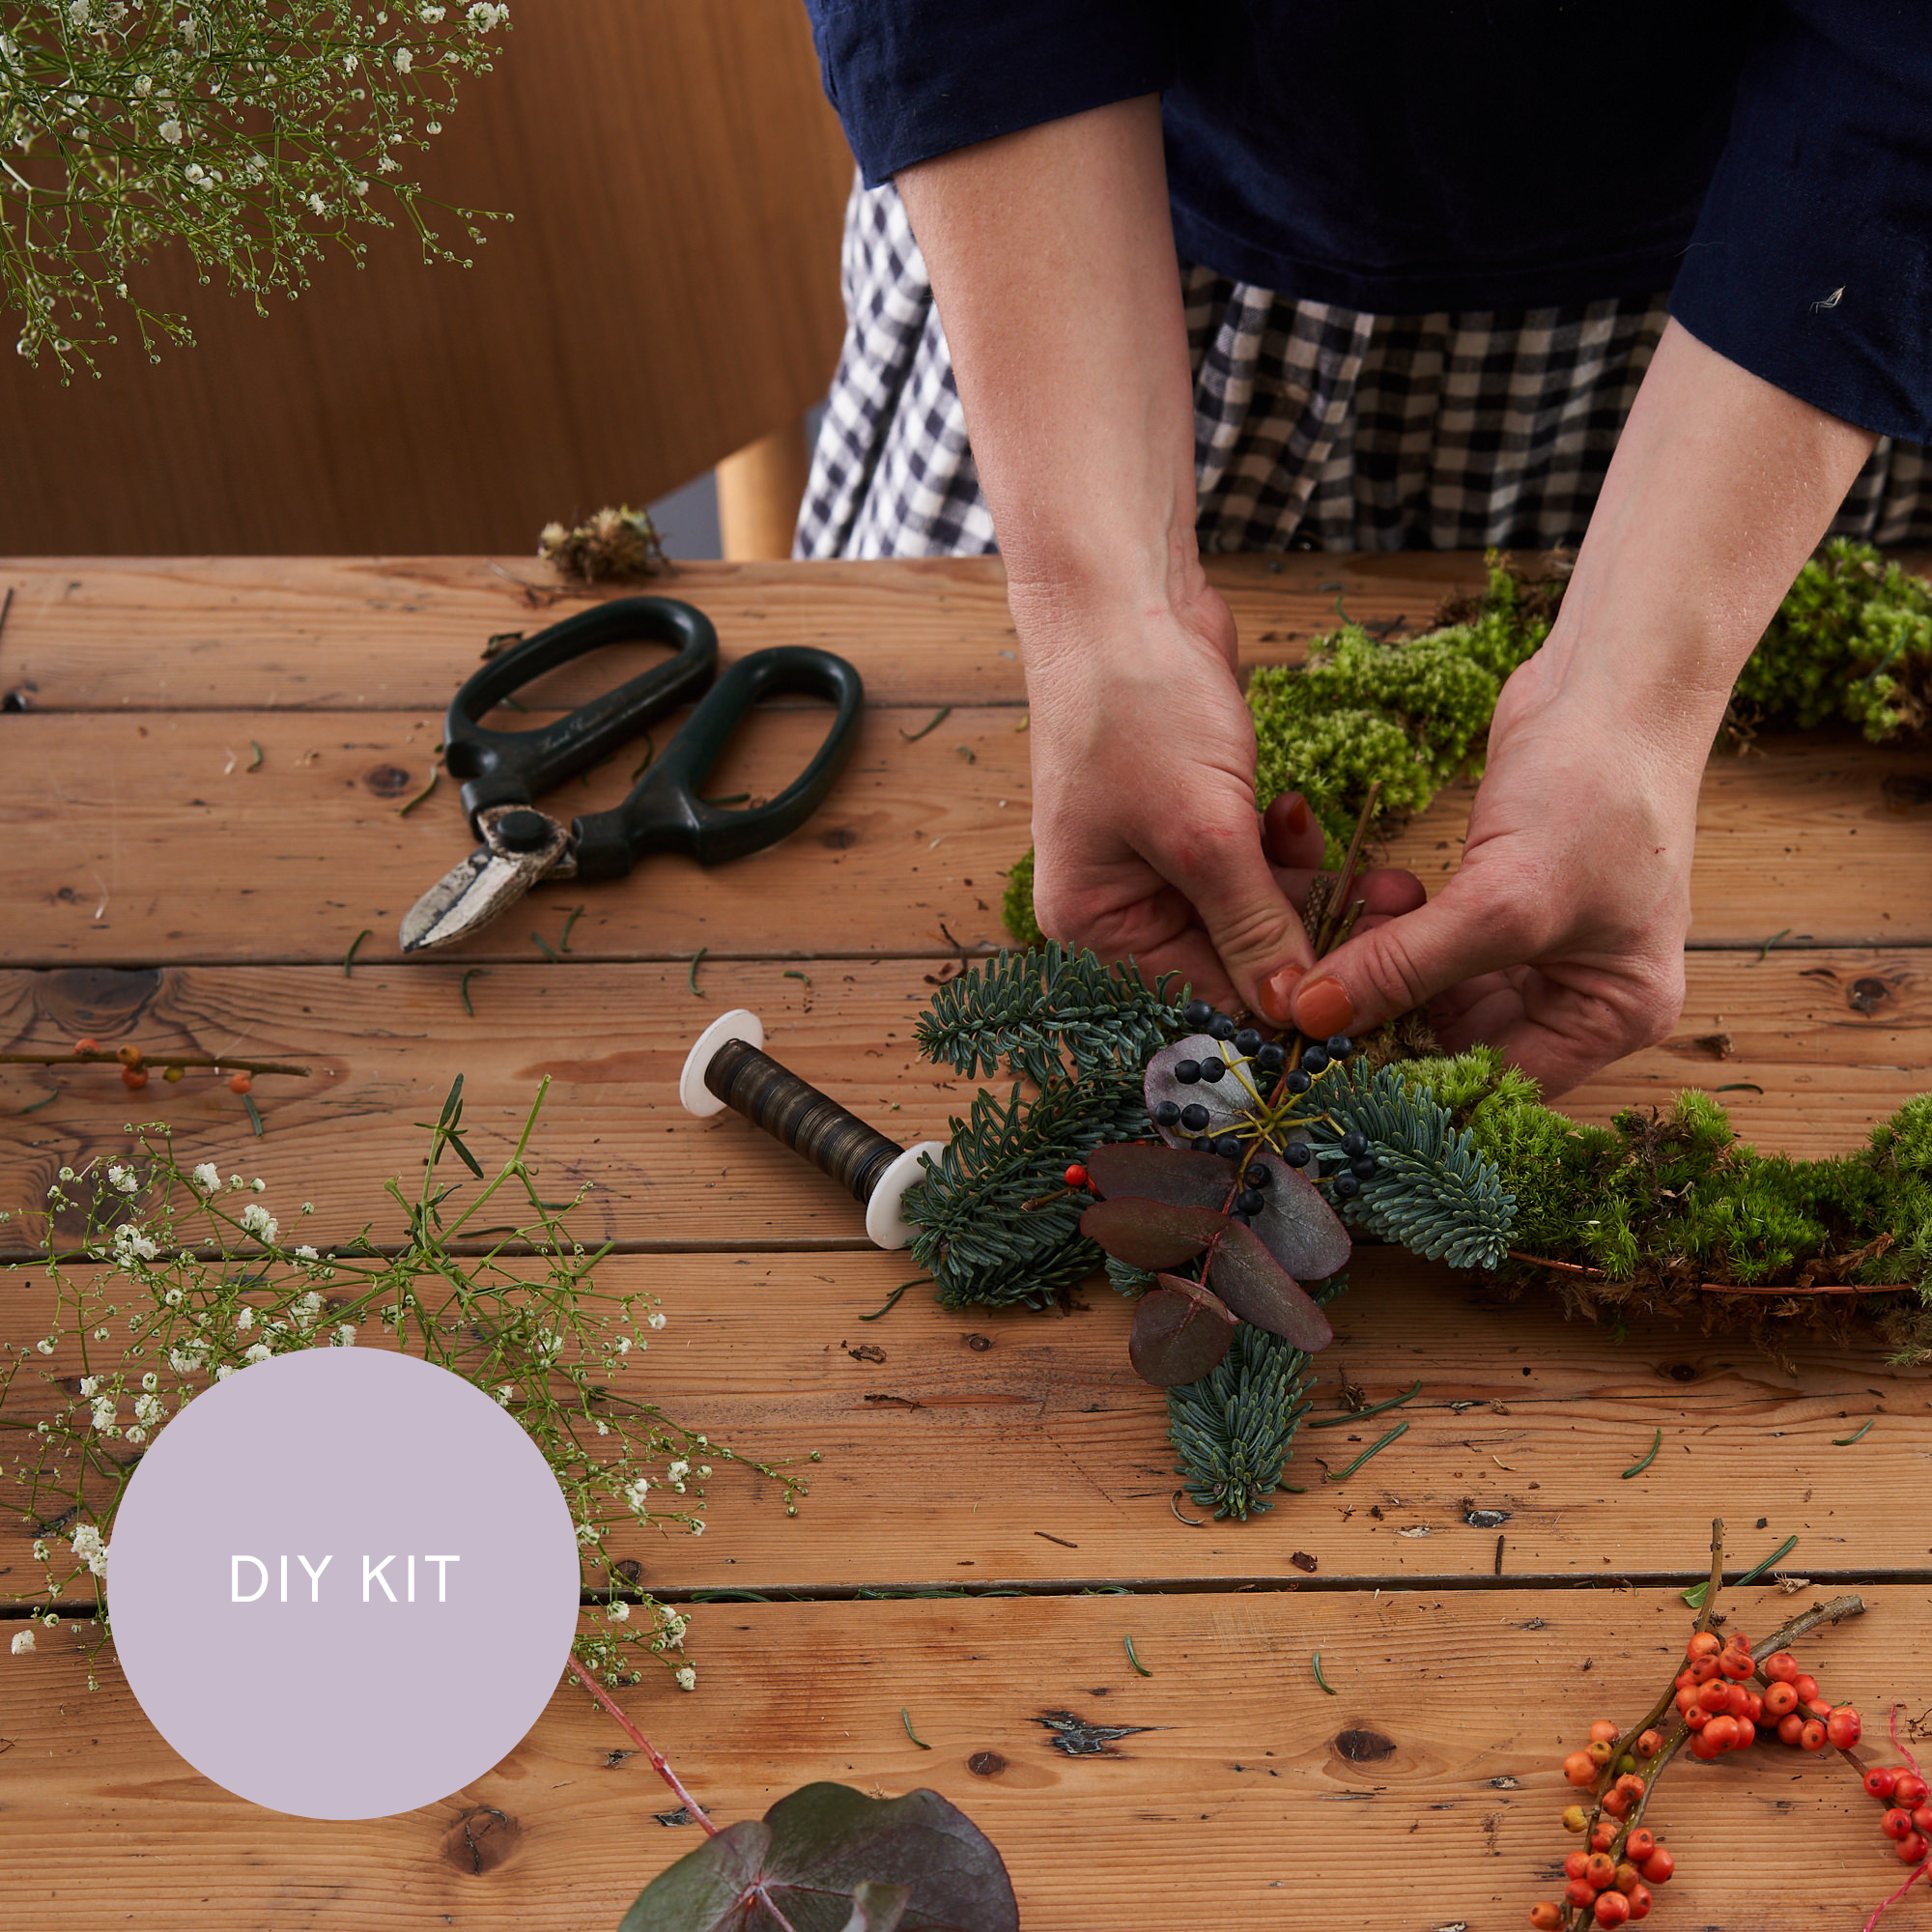 DIY kit to make your own classic Christmas wreath kit for festive and Christmas period